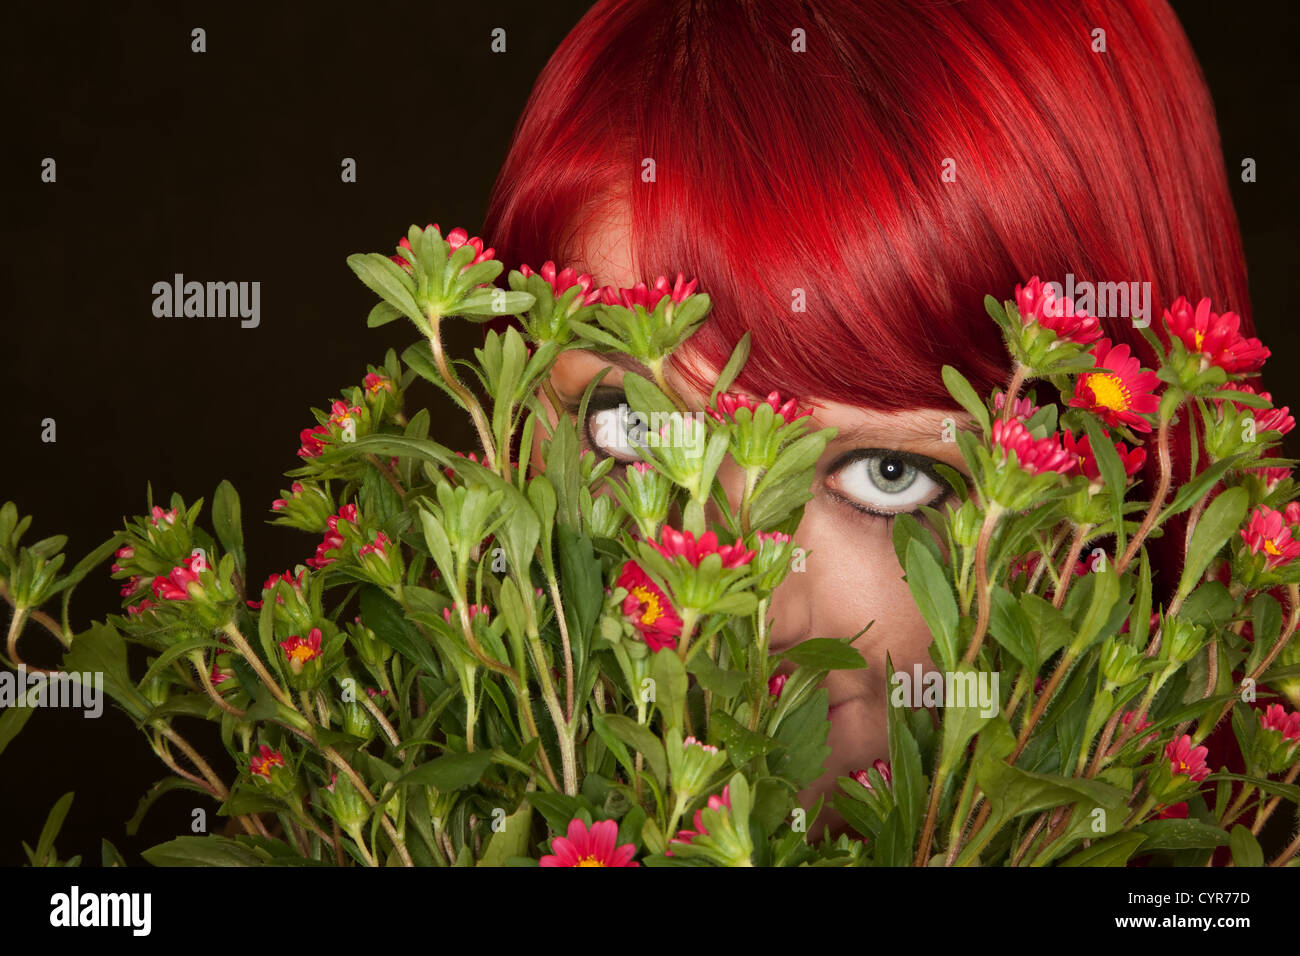 Pretty punky girl with brightly dyed red hair and flowers Stock Photo